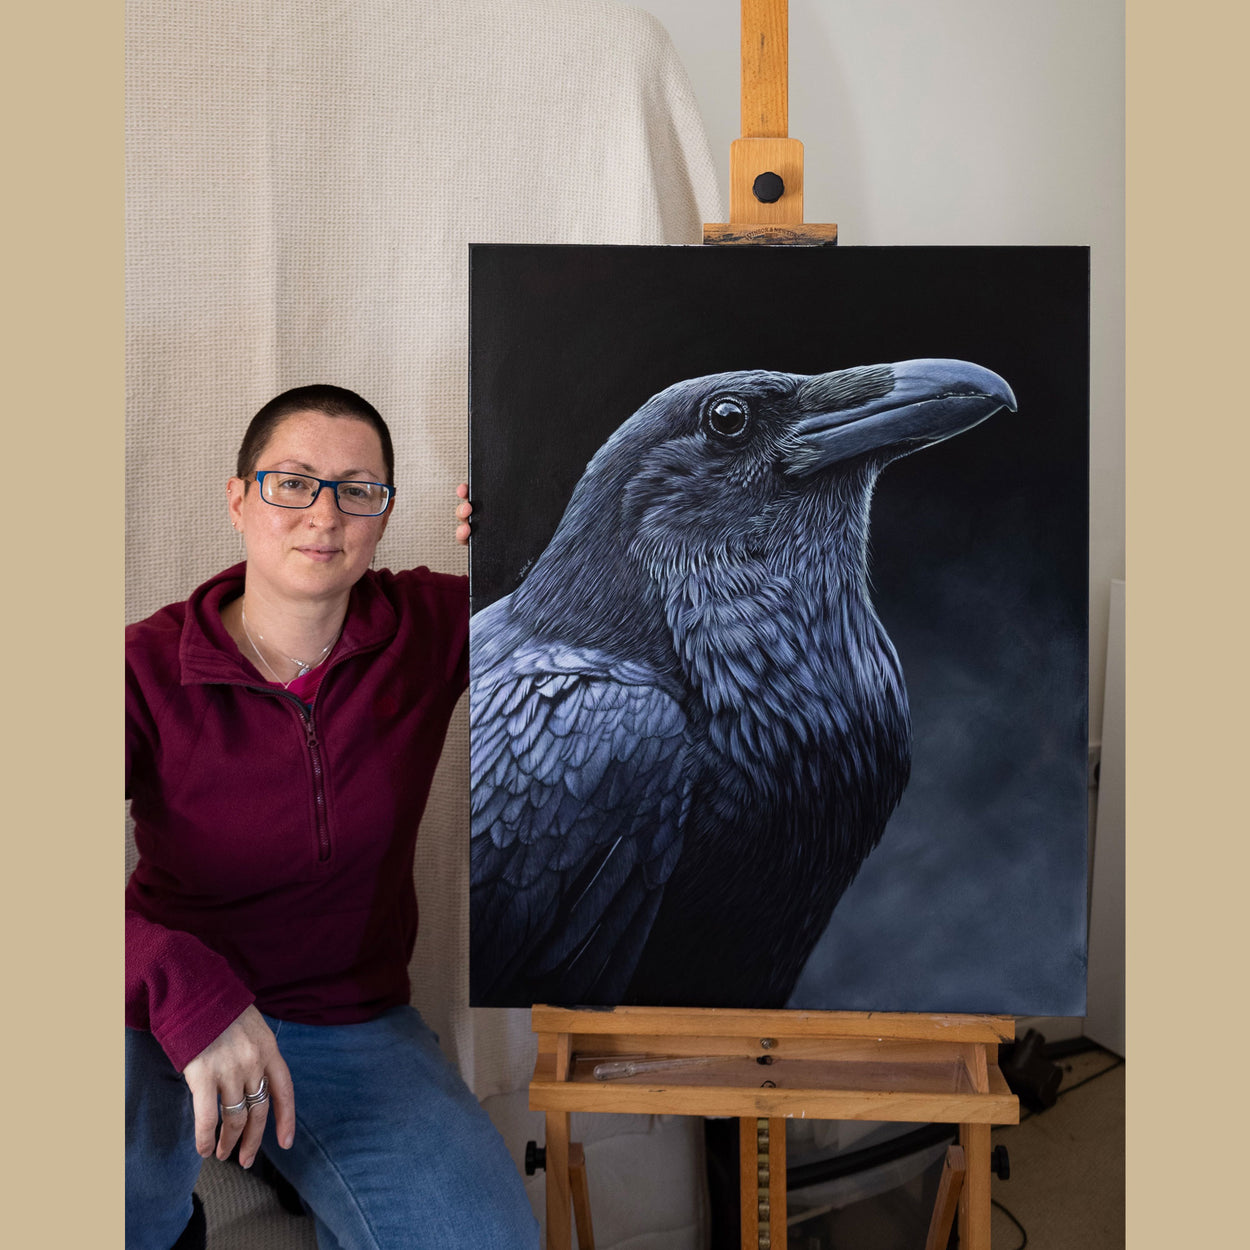 Raven Painting on Wall - Jill Dimond - The Thriving Wild